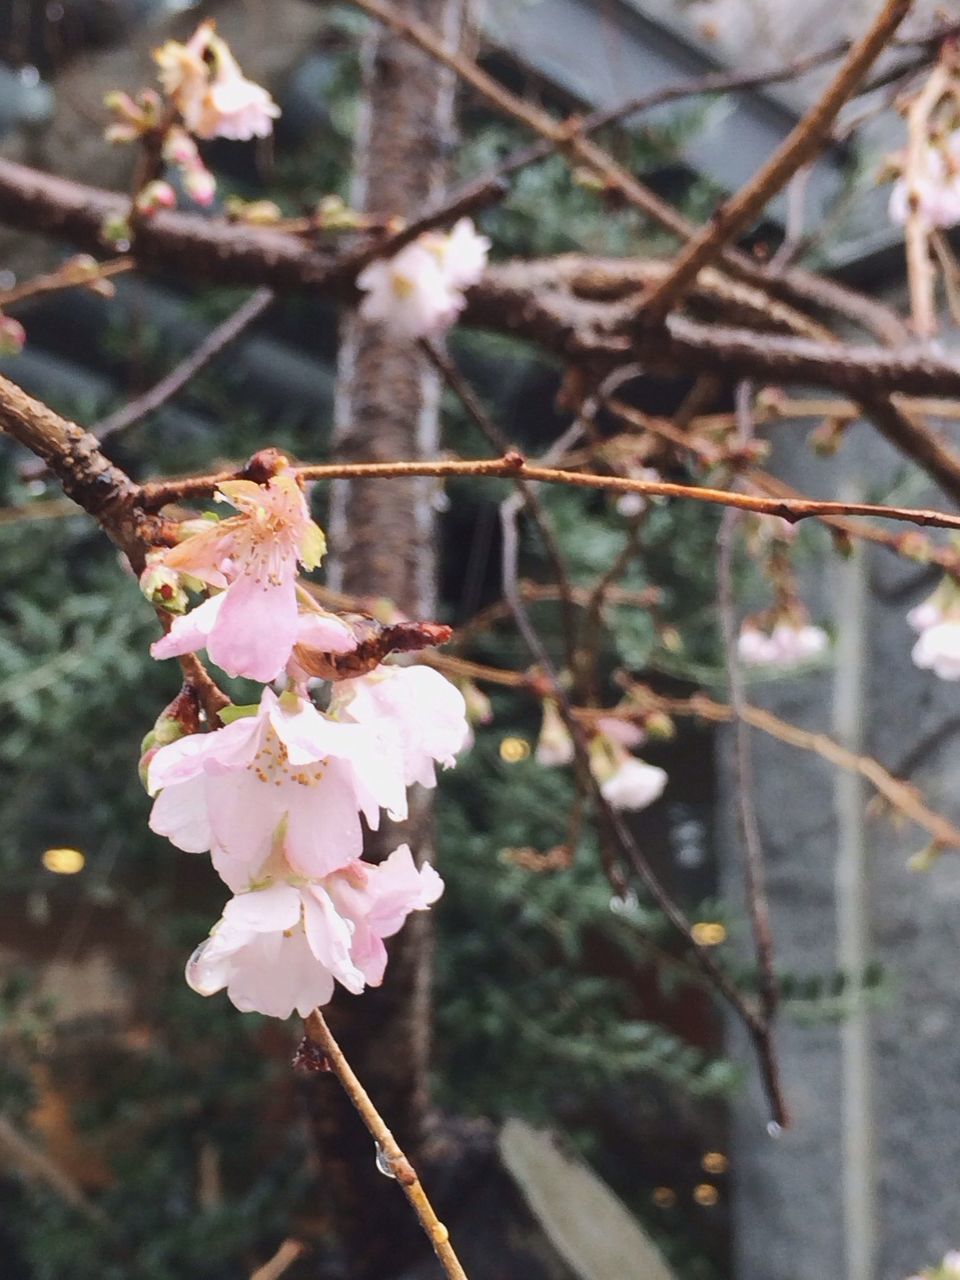 flower, branch, fragility, freshness, growth, focus on foreground, tree, petal, beauty in nature, nature, twig, cherry blossom, close-up, blossom, pink color, in bloom, cherry tree, flower head, blooming, springtime